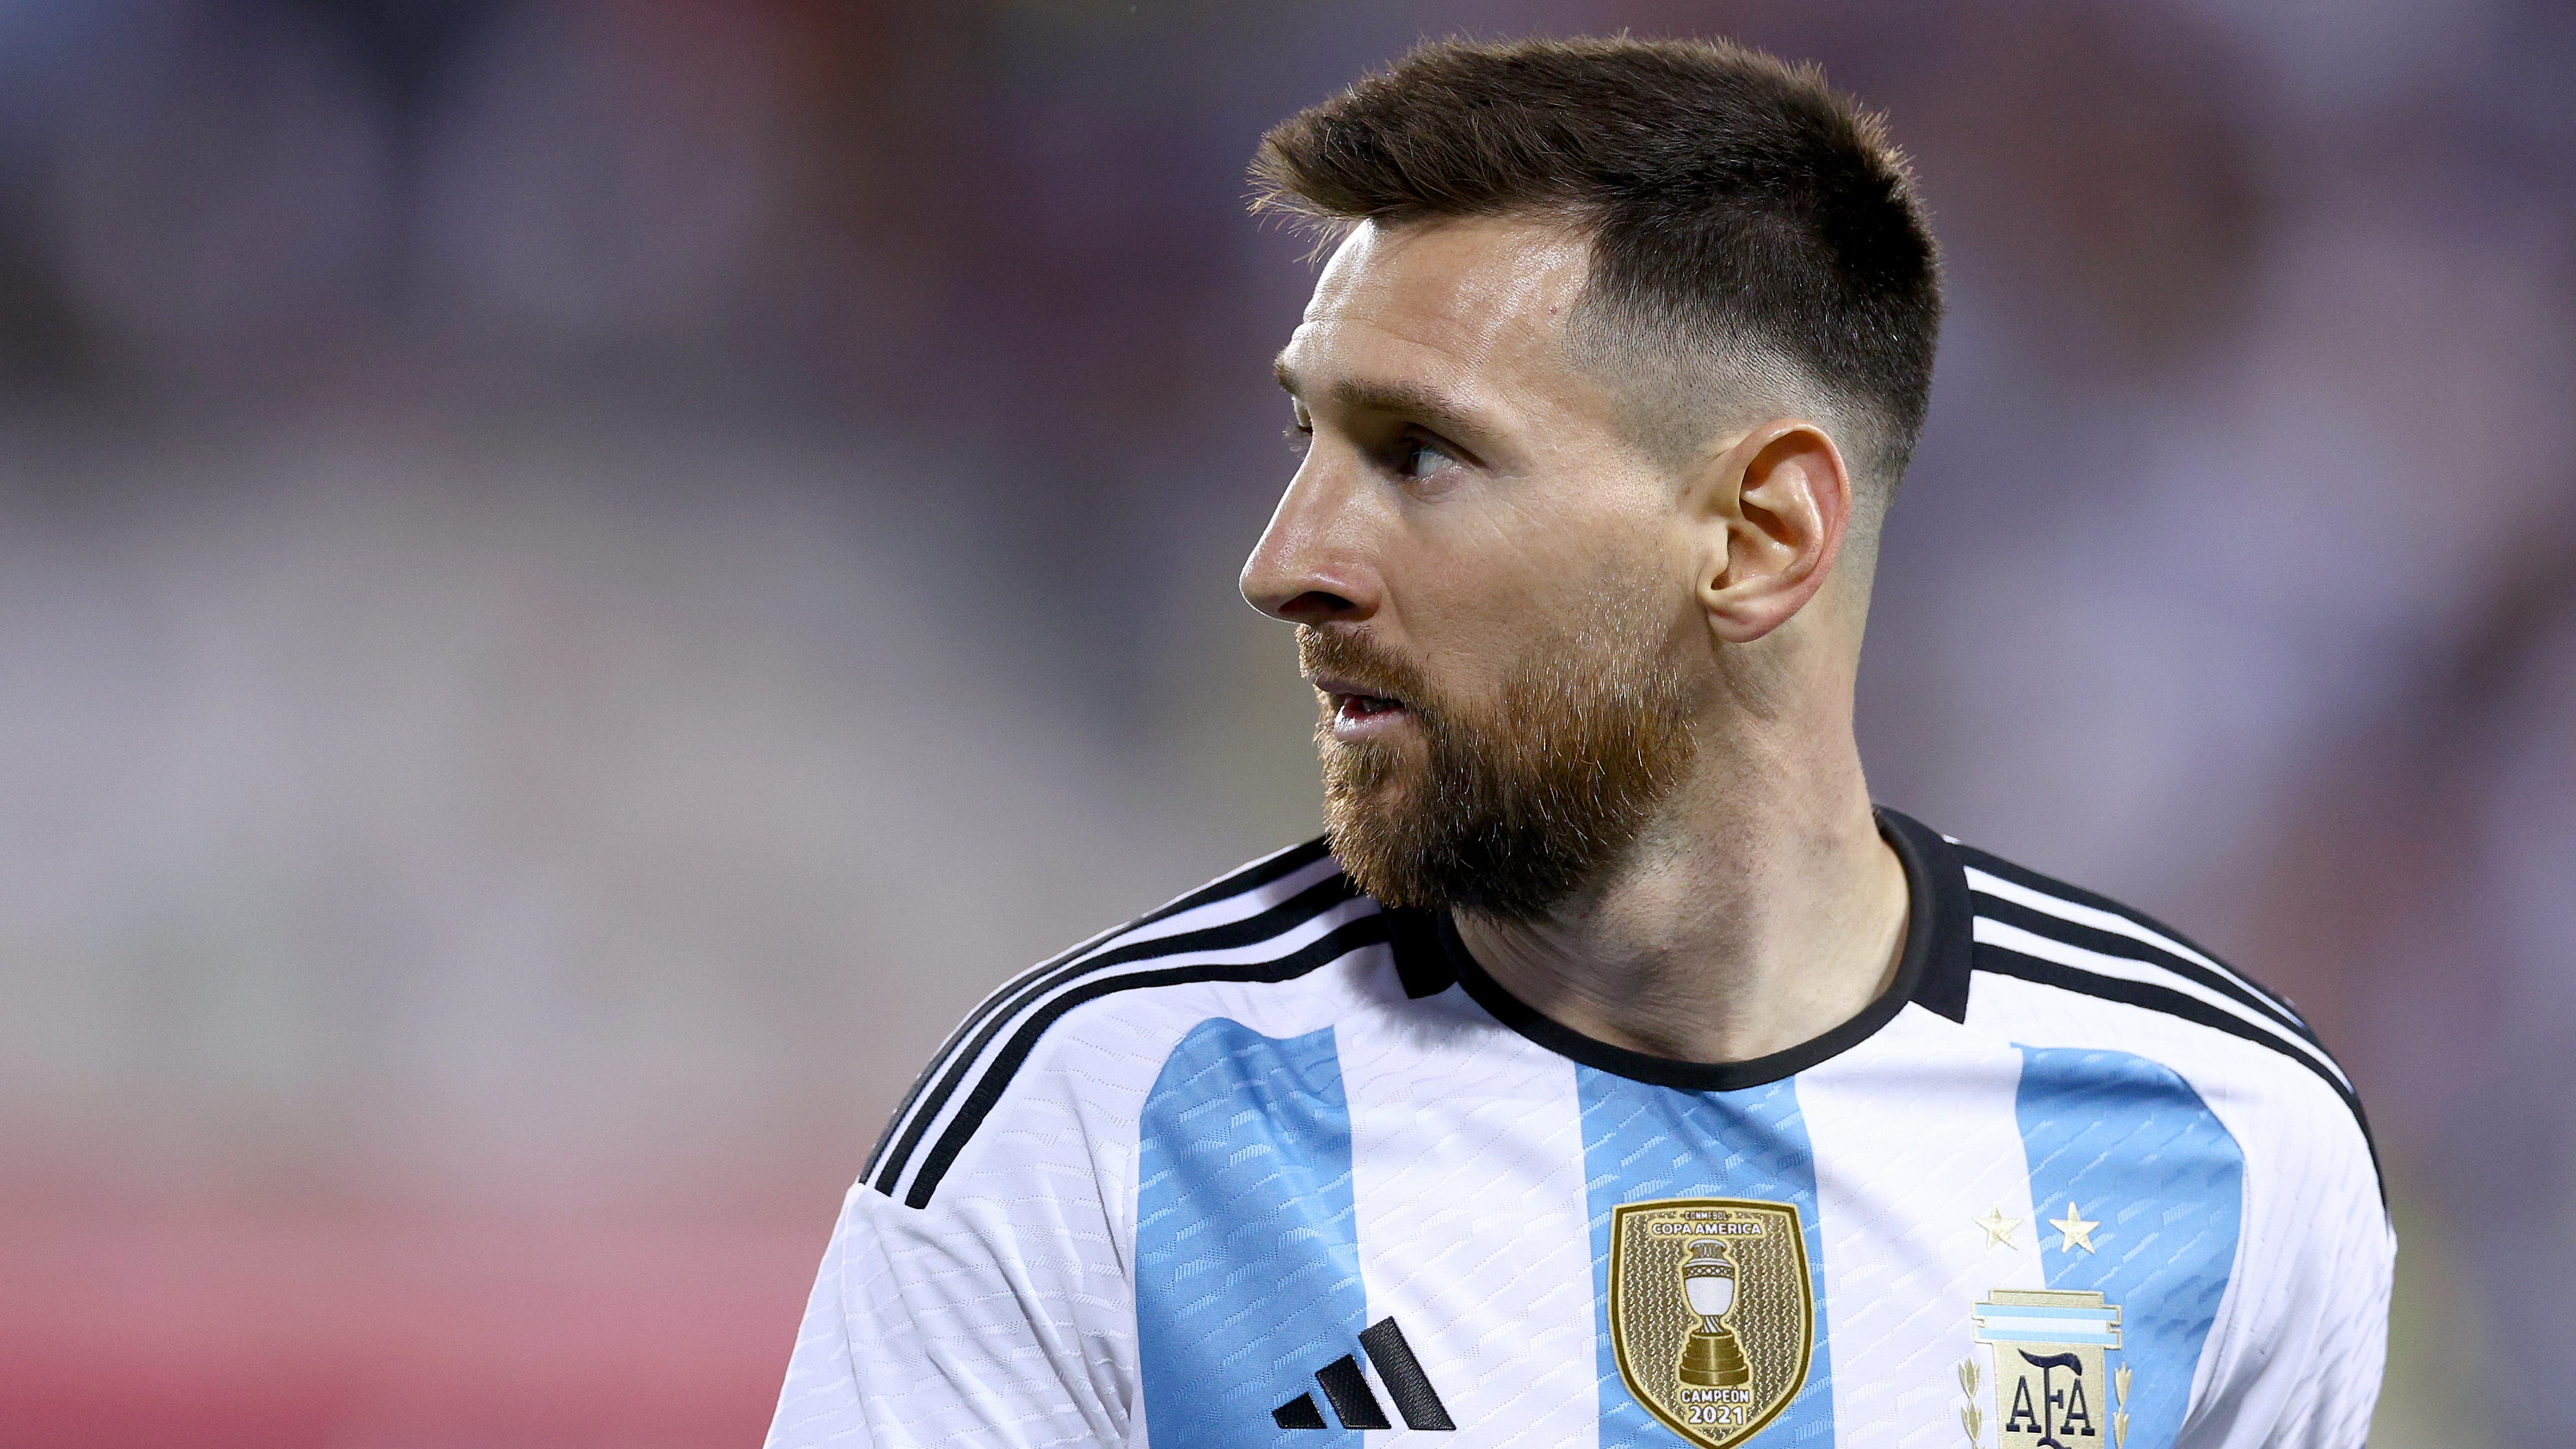 Tissue paper used by Lionel Messi costs Rs 7.4 crores - TeluguBulletin.com